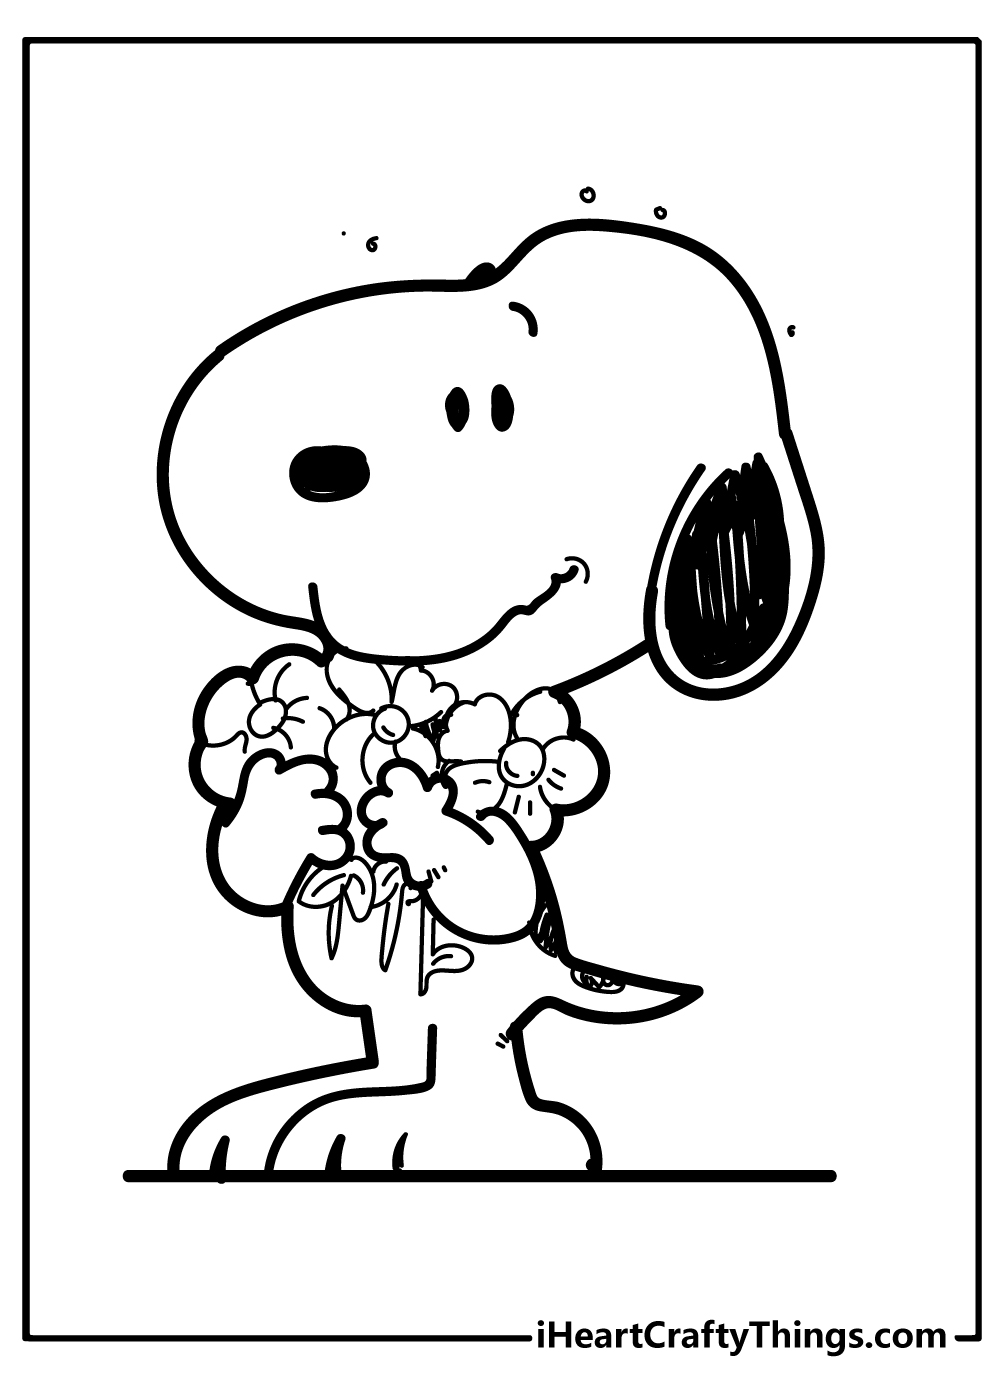 Snoopy Coloring Original Sheet for children free download